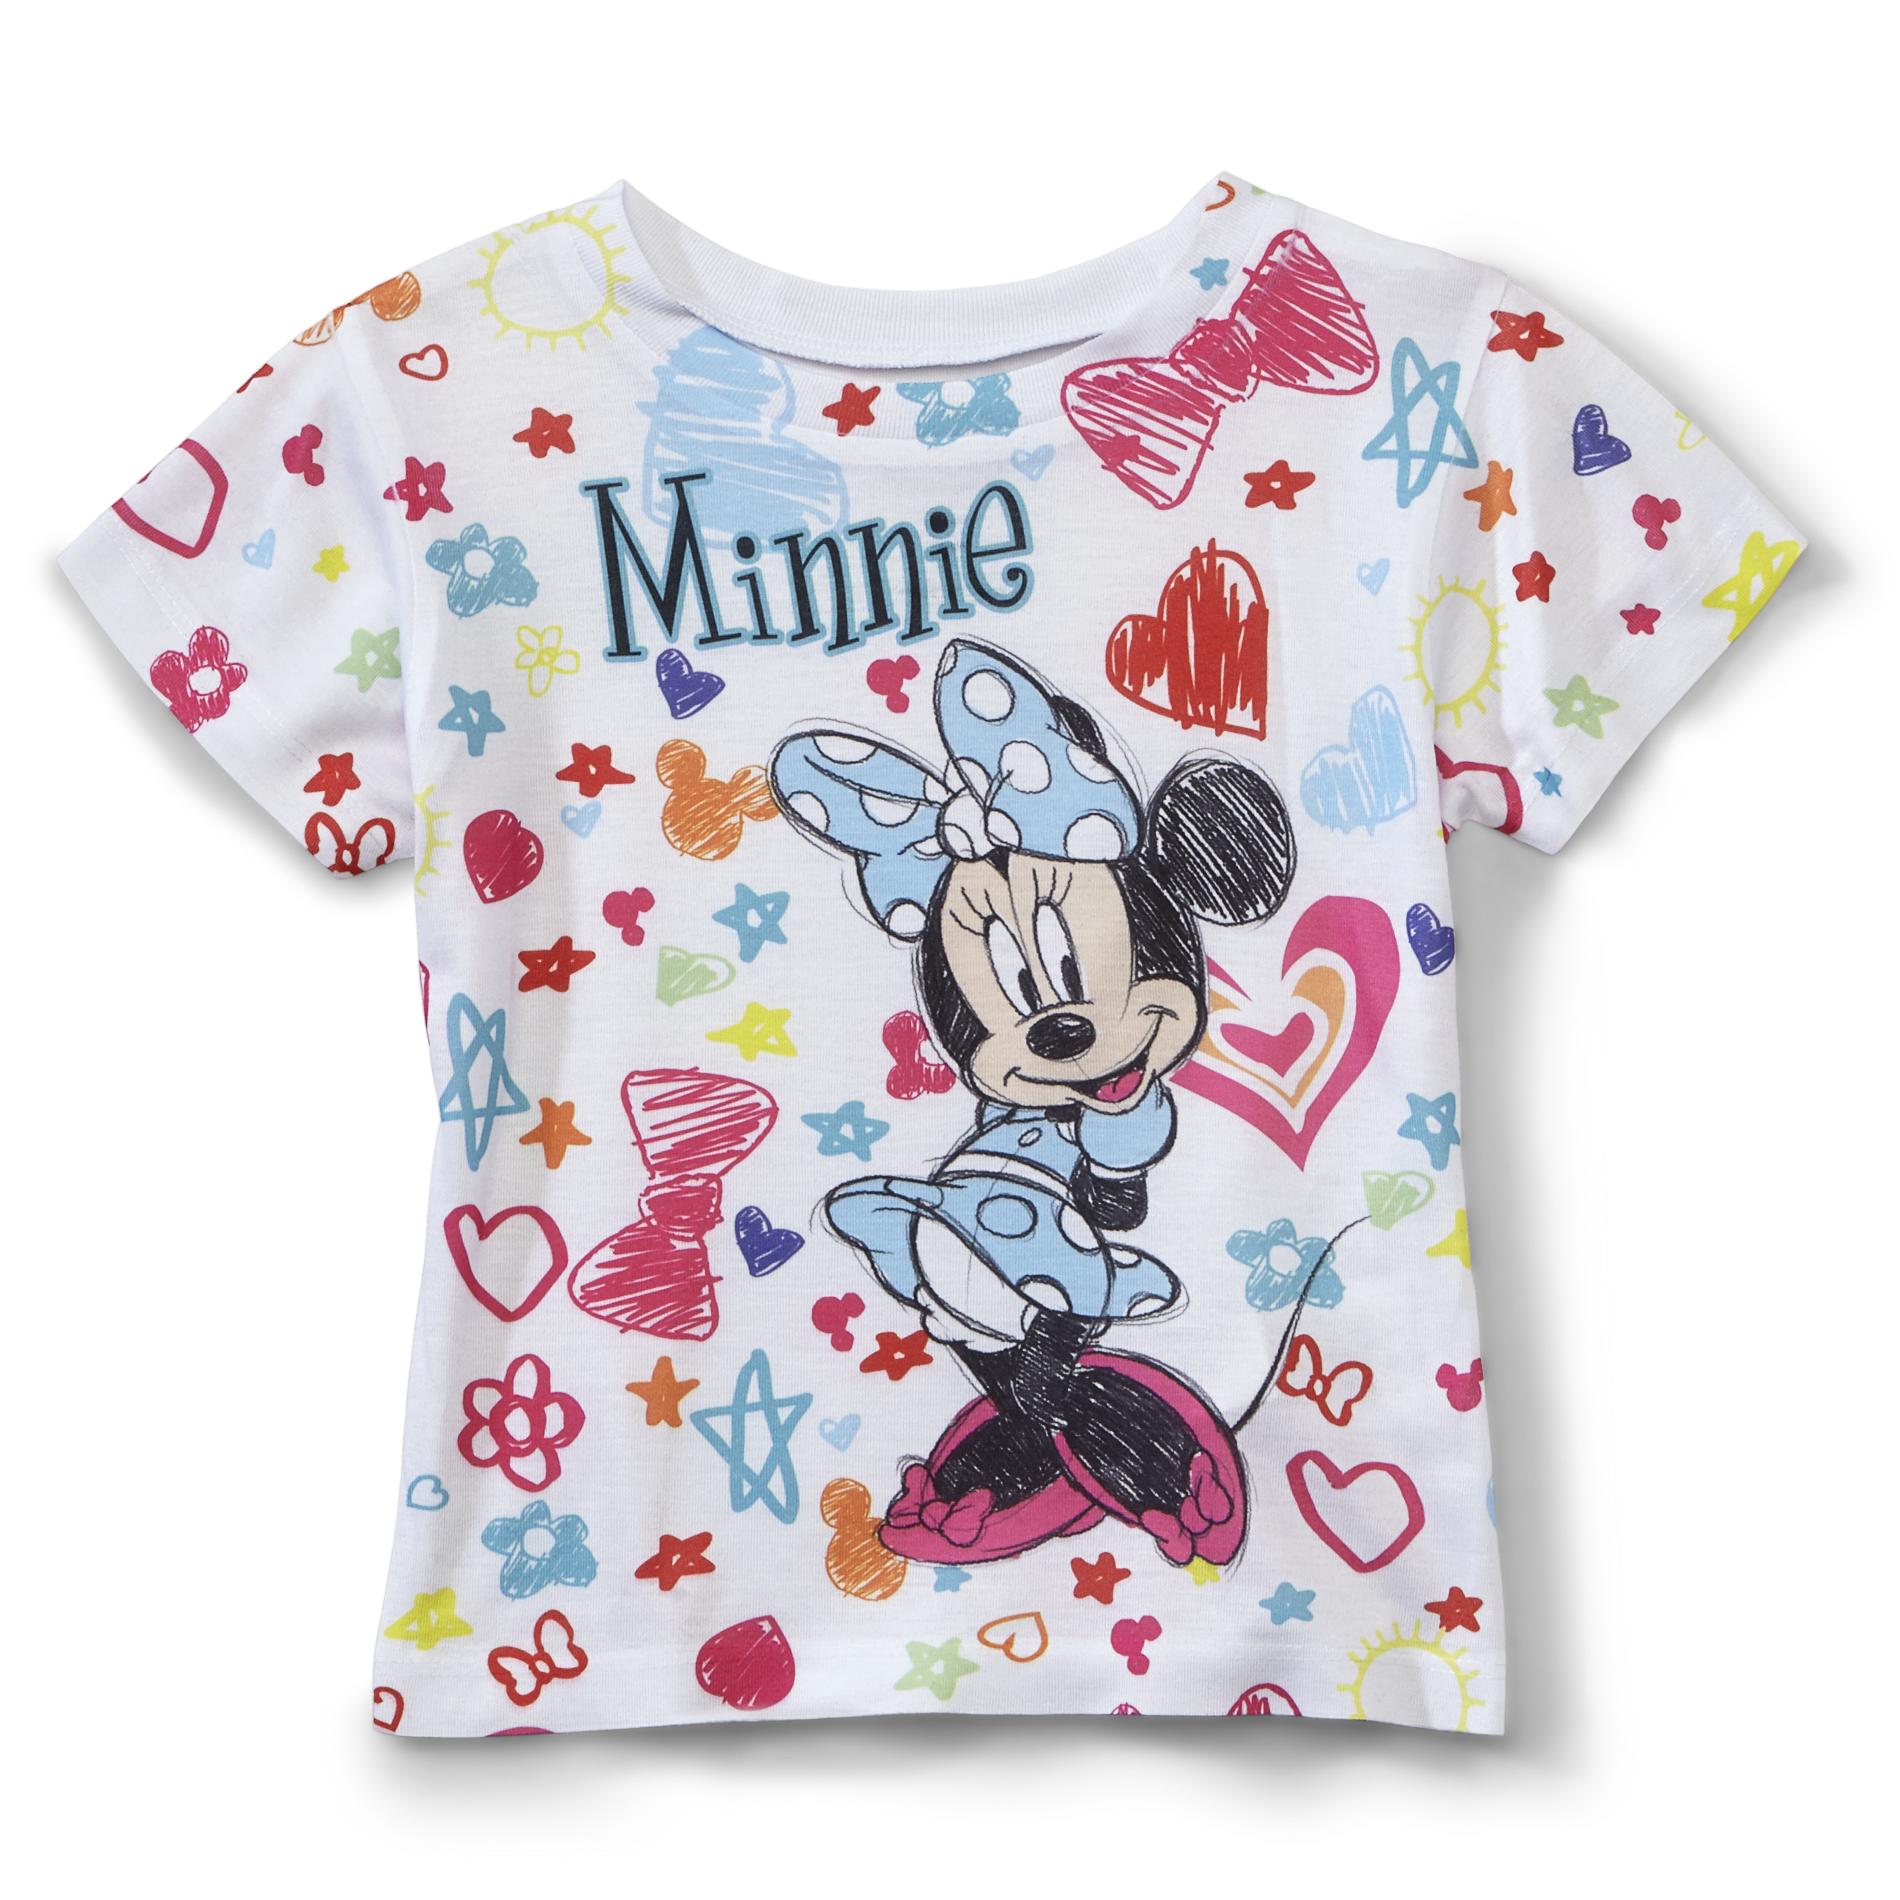 Disney Toddler Girl's Sublimation T-Shirt - Minnie Mouse